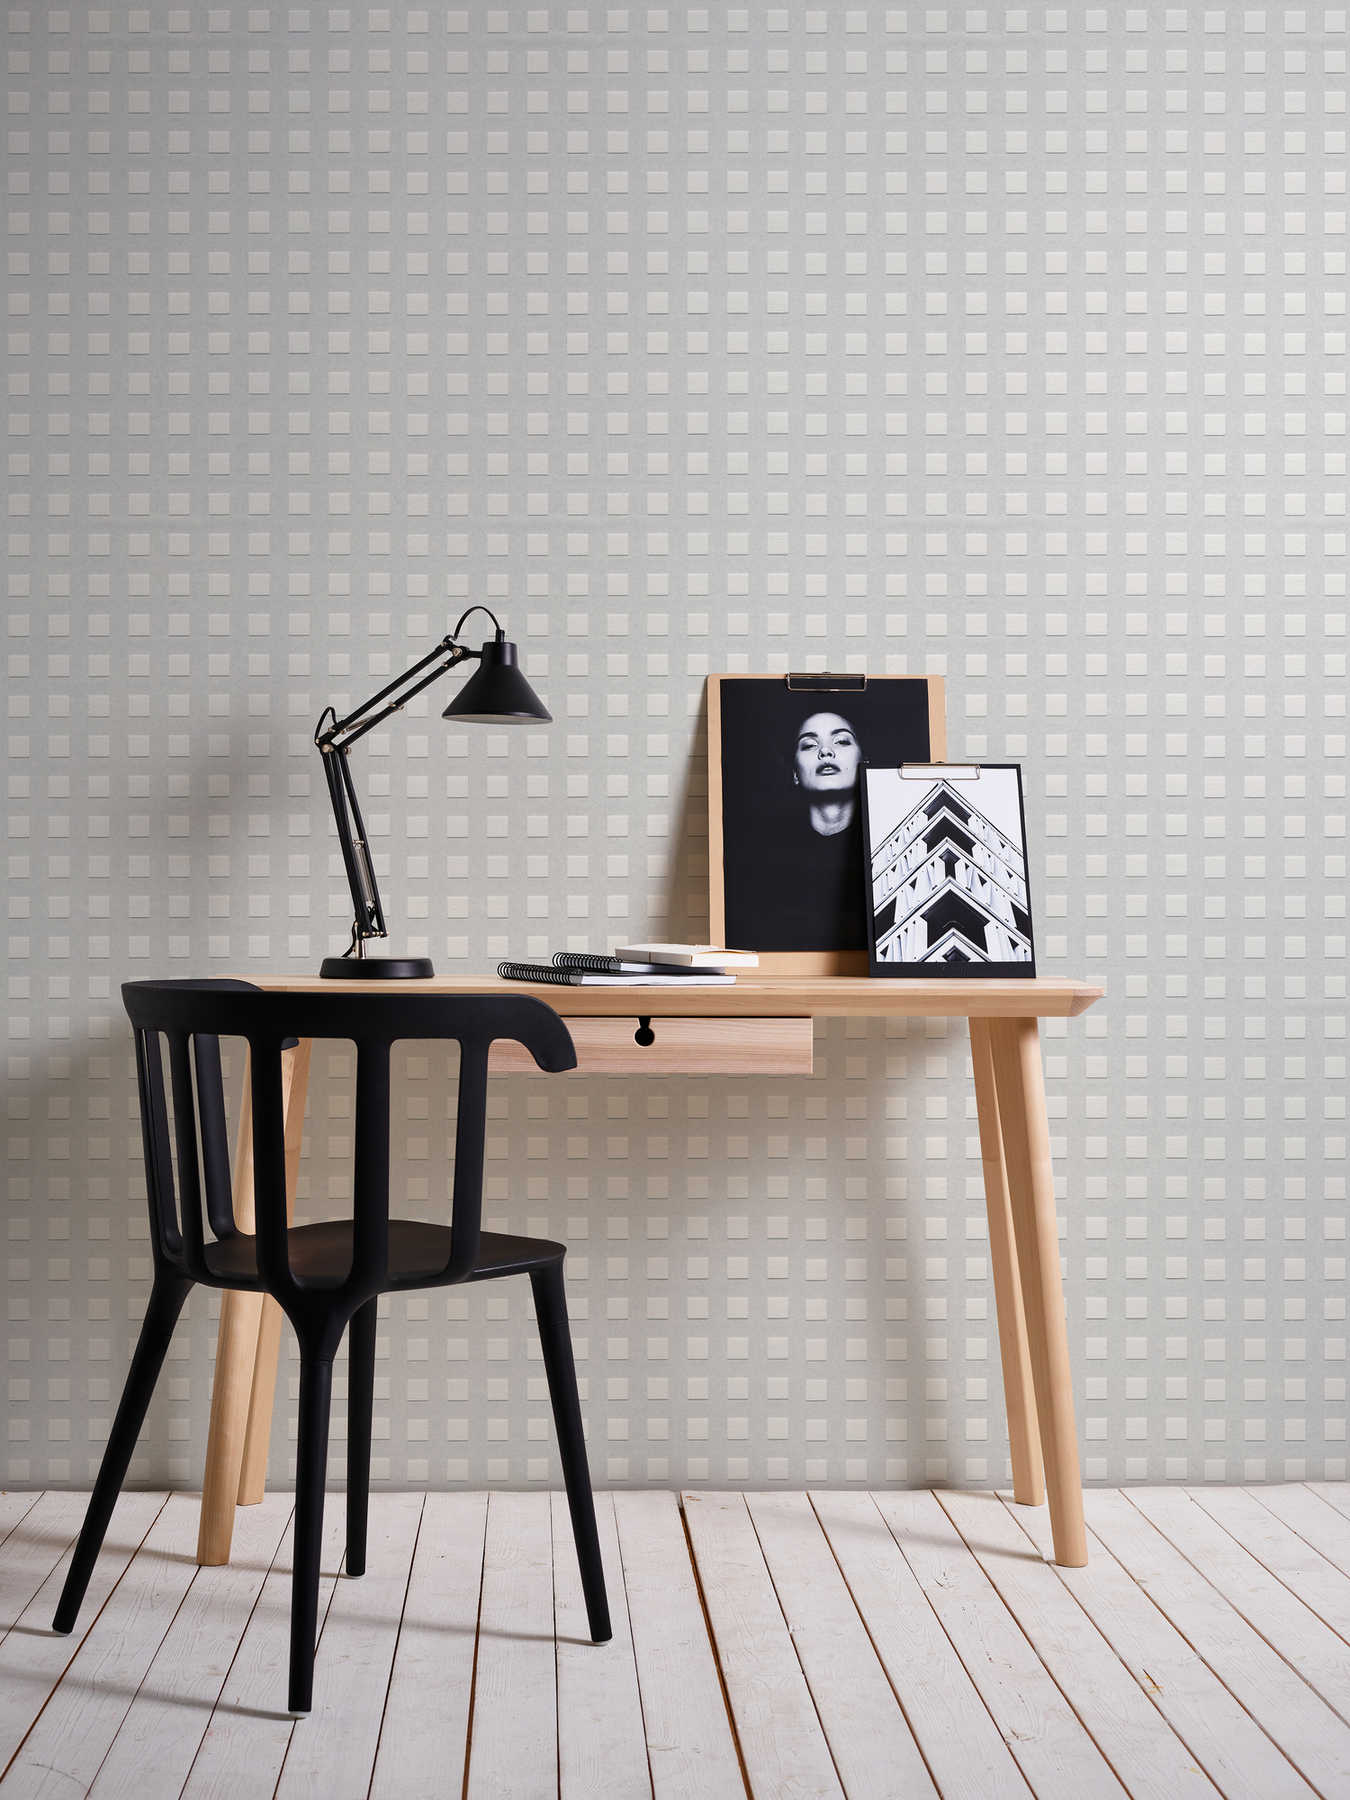             Paintable wallpaper with 3D cuboid pattern - white
        